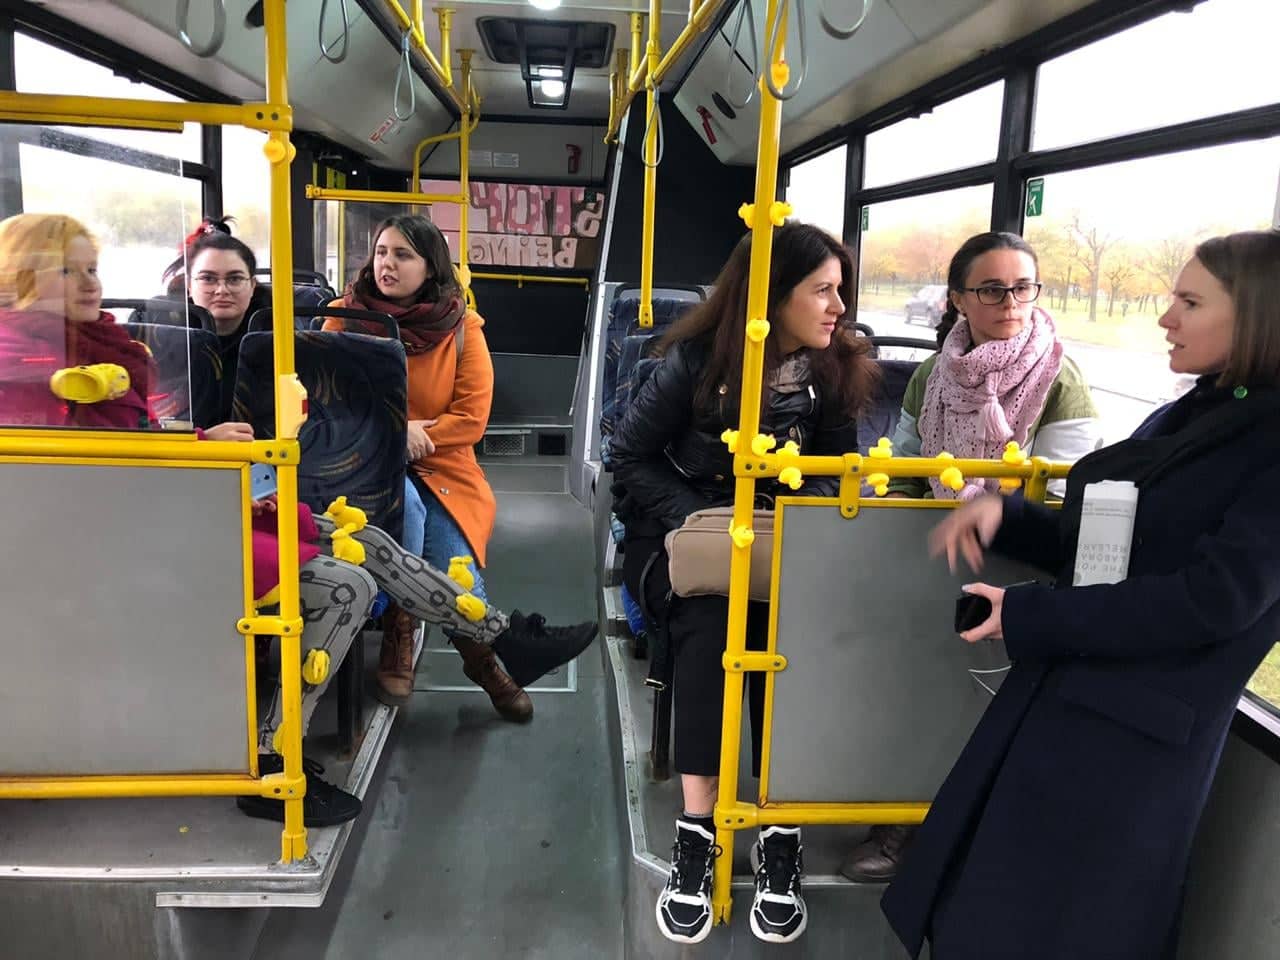 Once on a Bus, 2019. Art Weekend public programme, St Petersburg. Curator: Anna Zavediy. Here, a bus becomes a safe space where a therapeutic exchange of doubt and shame is possible